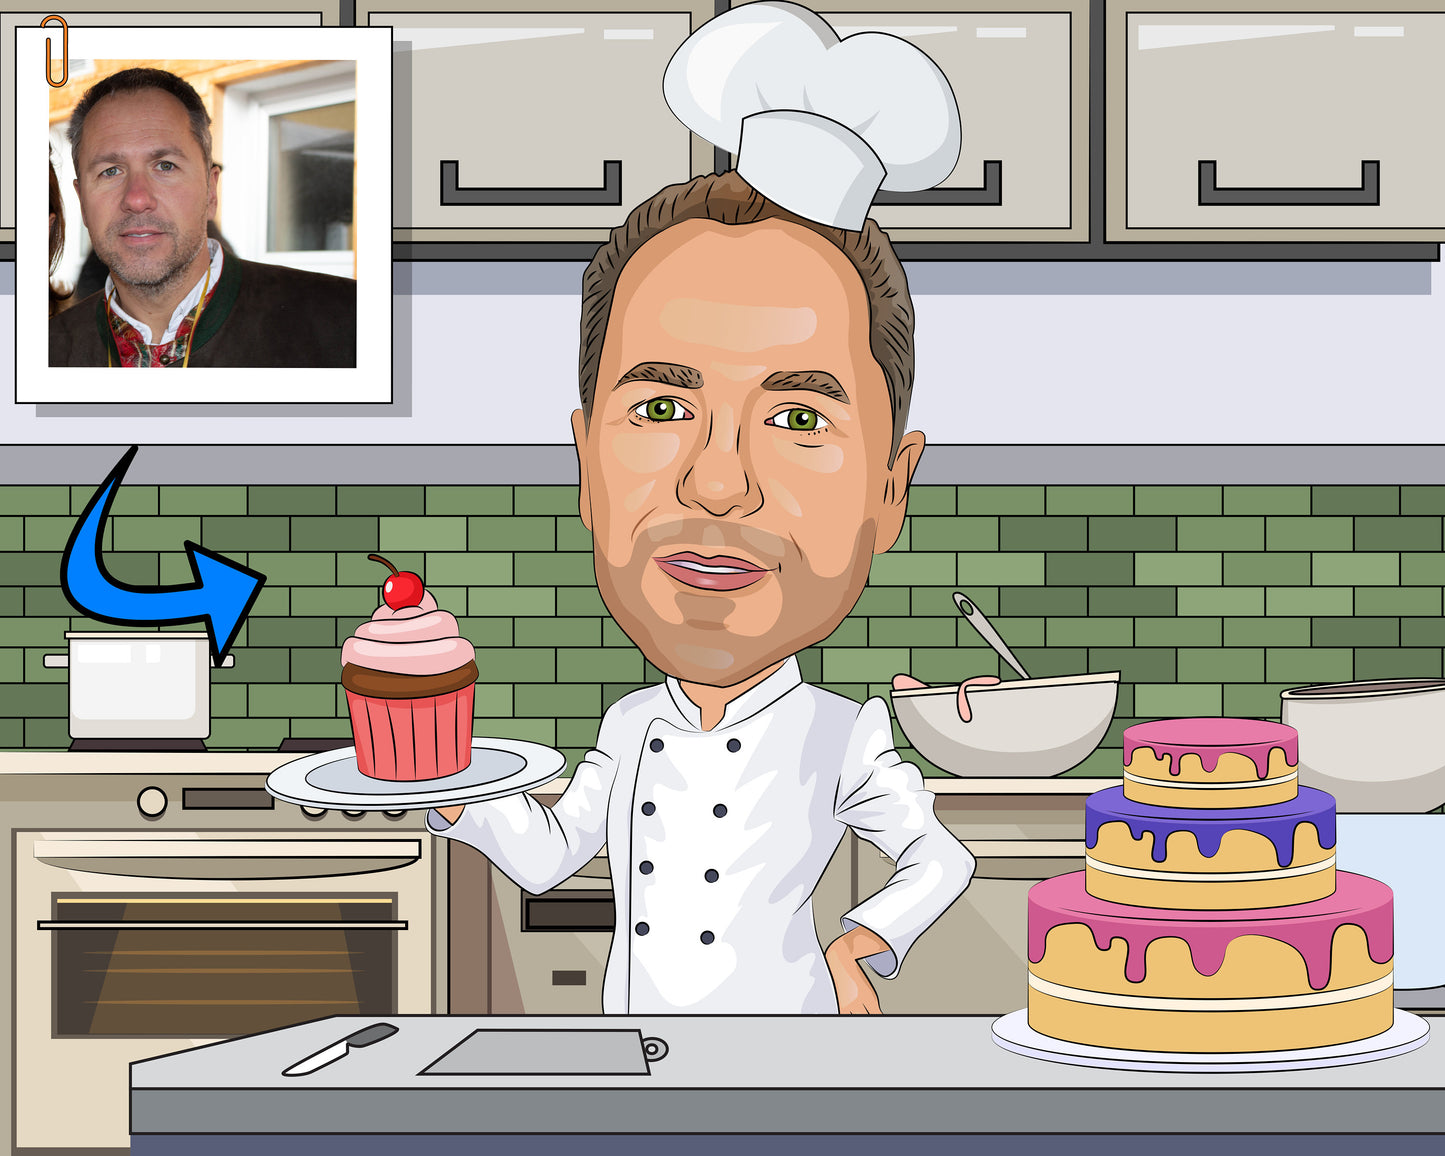 Pastry Chef Gift - Custom Caricature Portrait From Your Photo